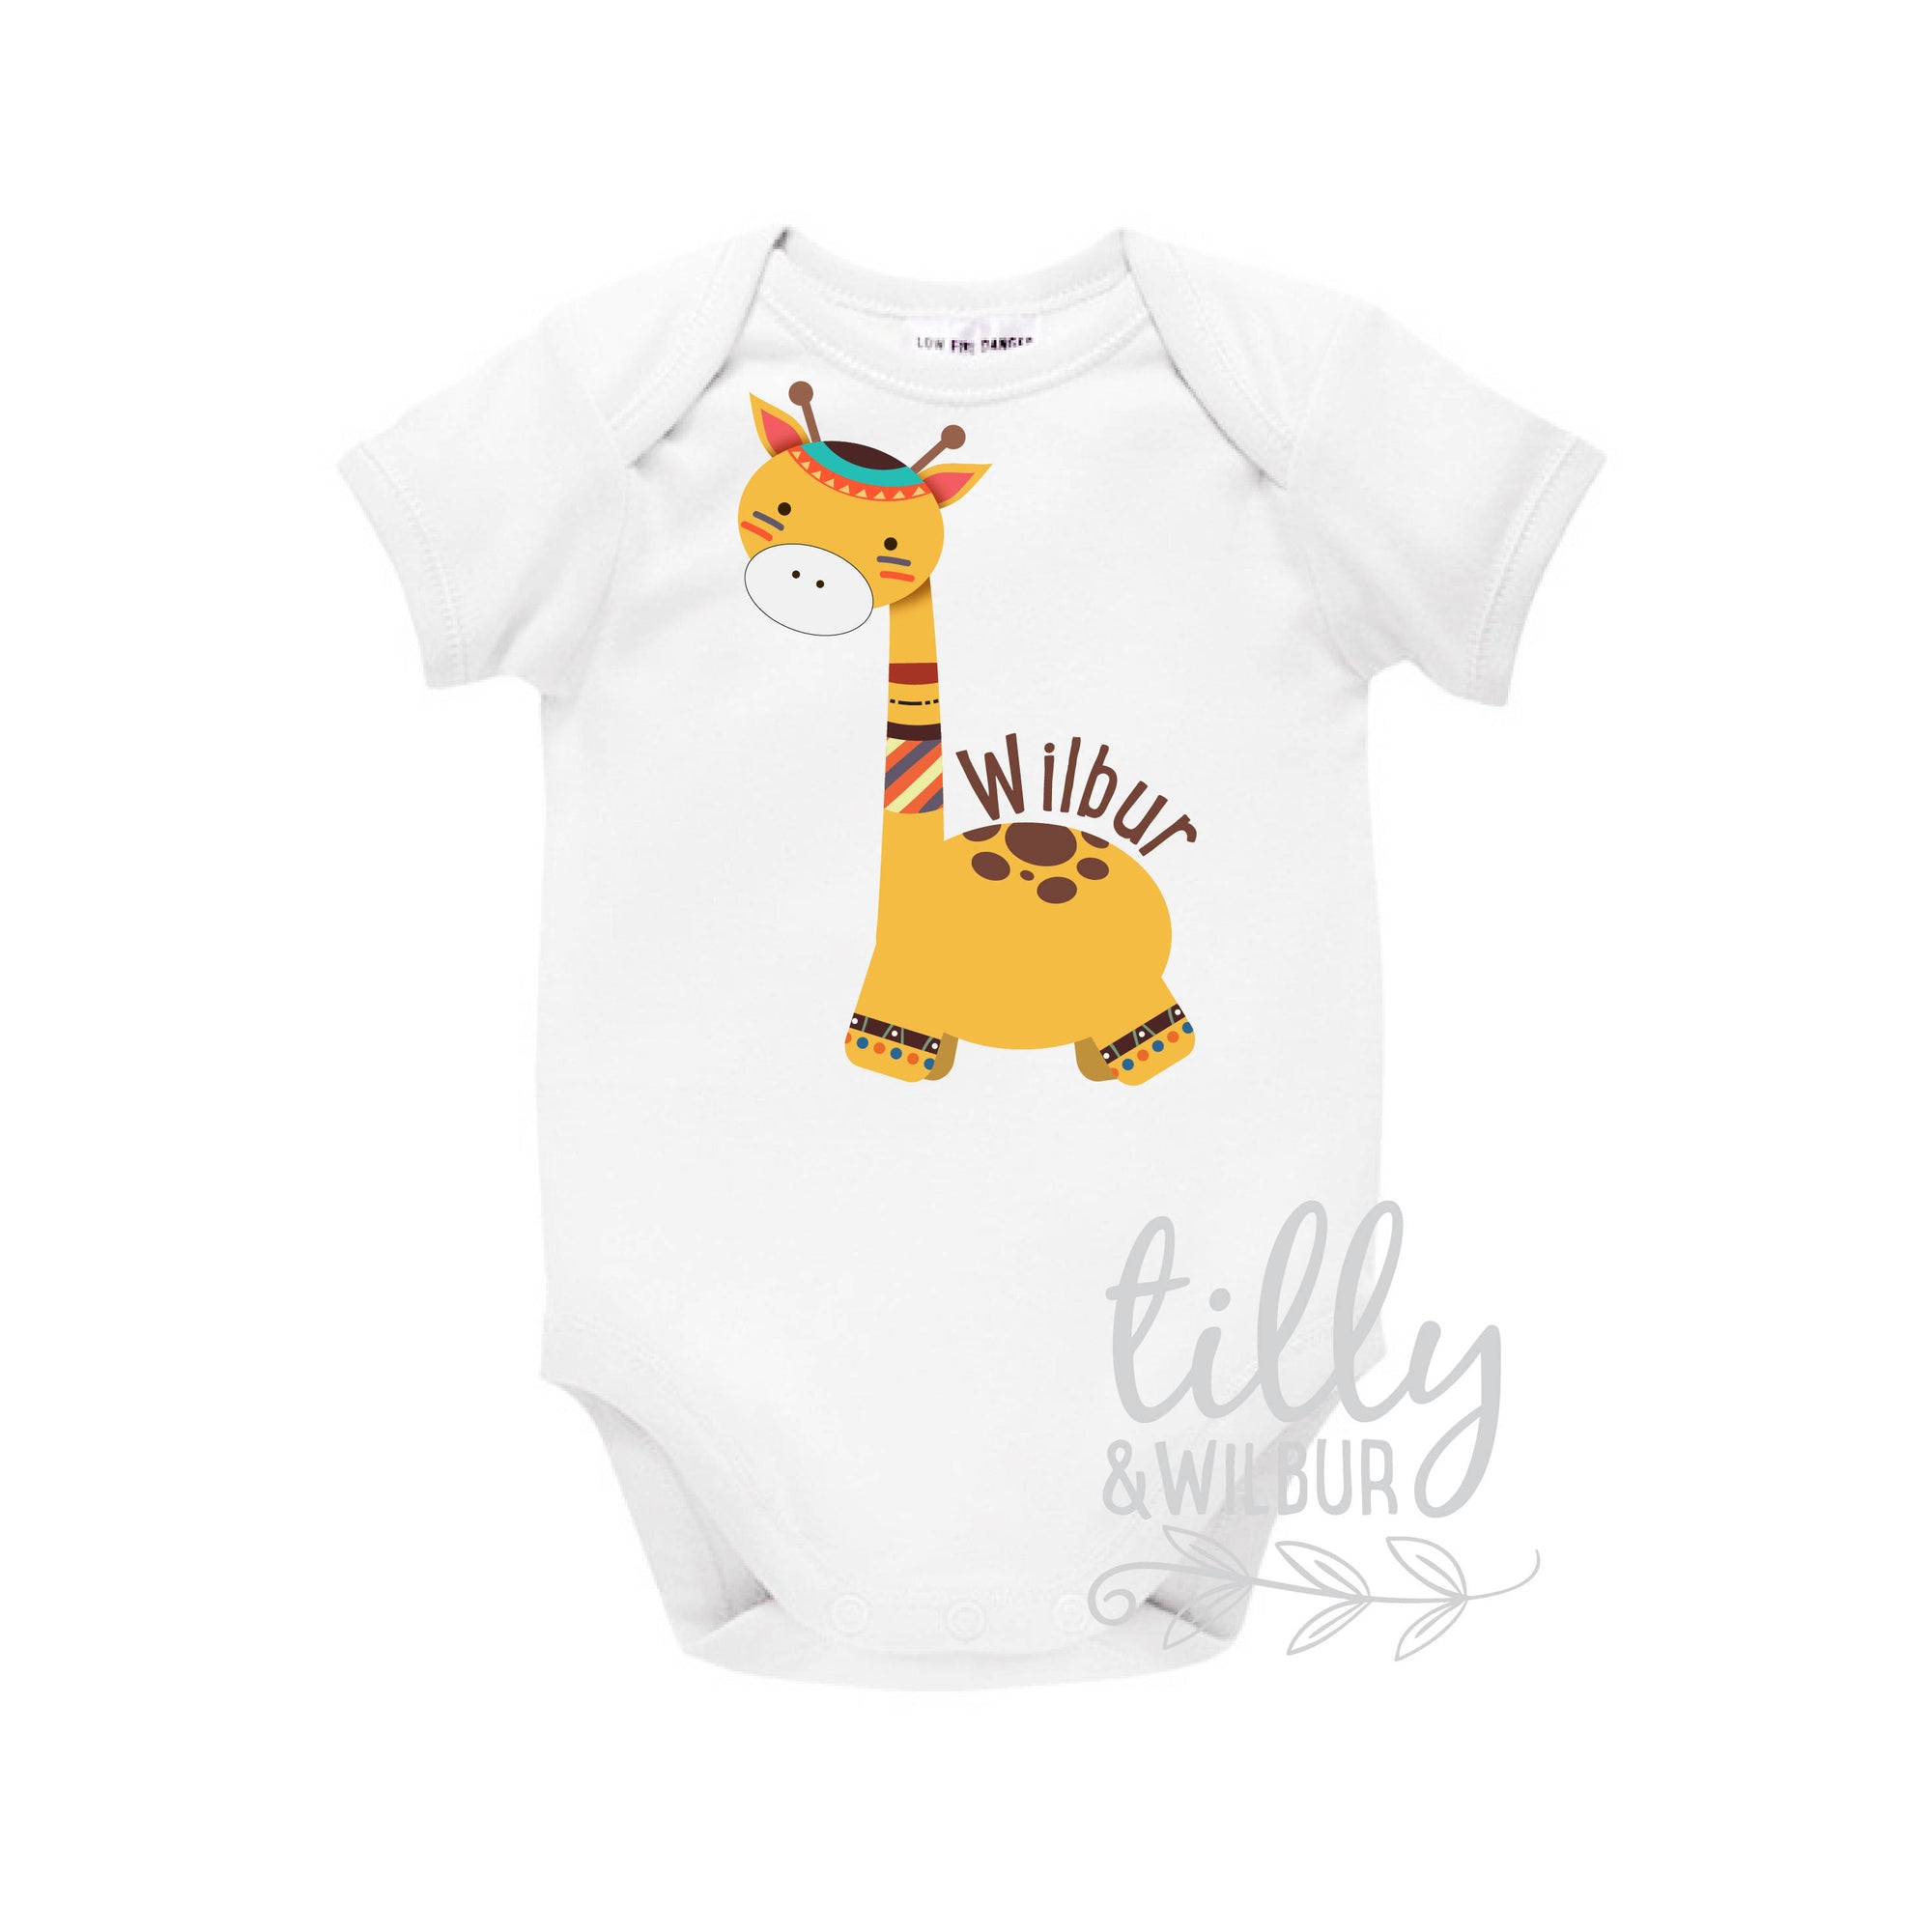 Personalised Baby Bodysuit With Giraffe, Tribal Boho Design, Personalised Newborn Gift, Personalized Baby Clothes, New Baby Gift, U-W-BS